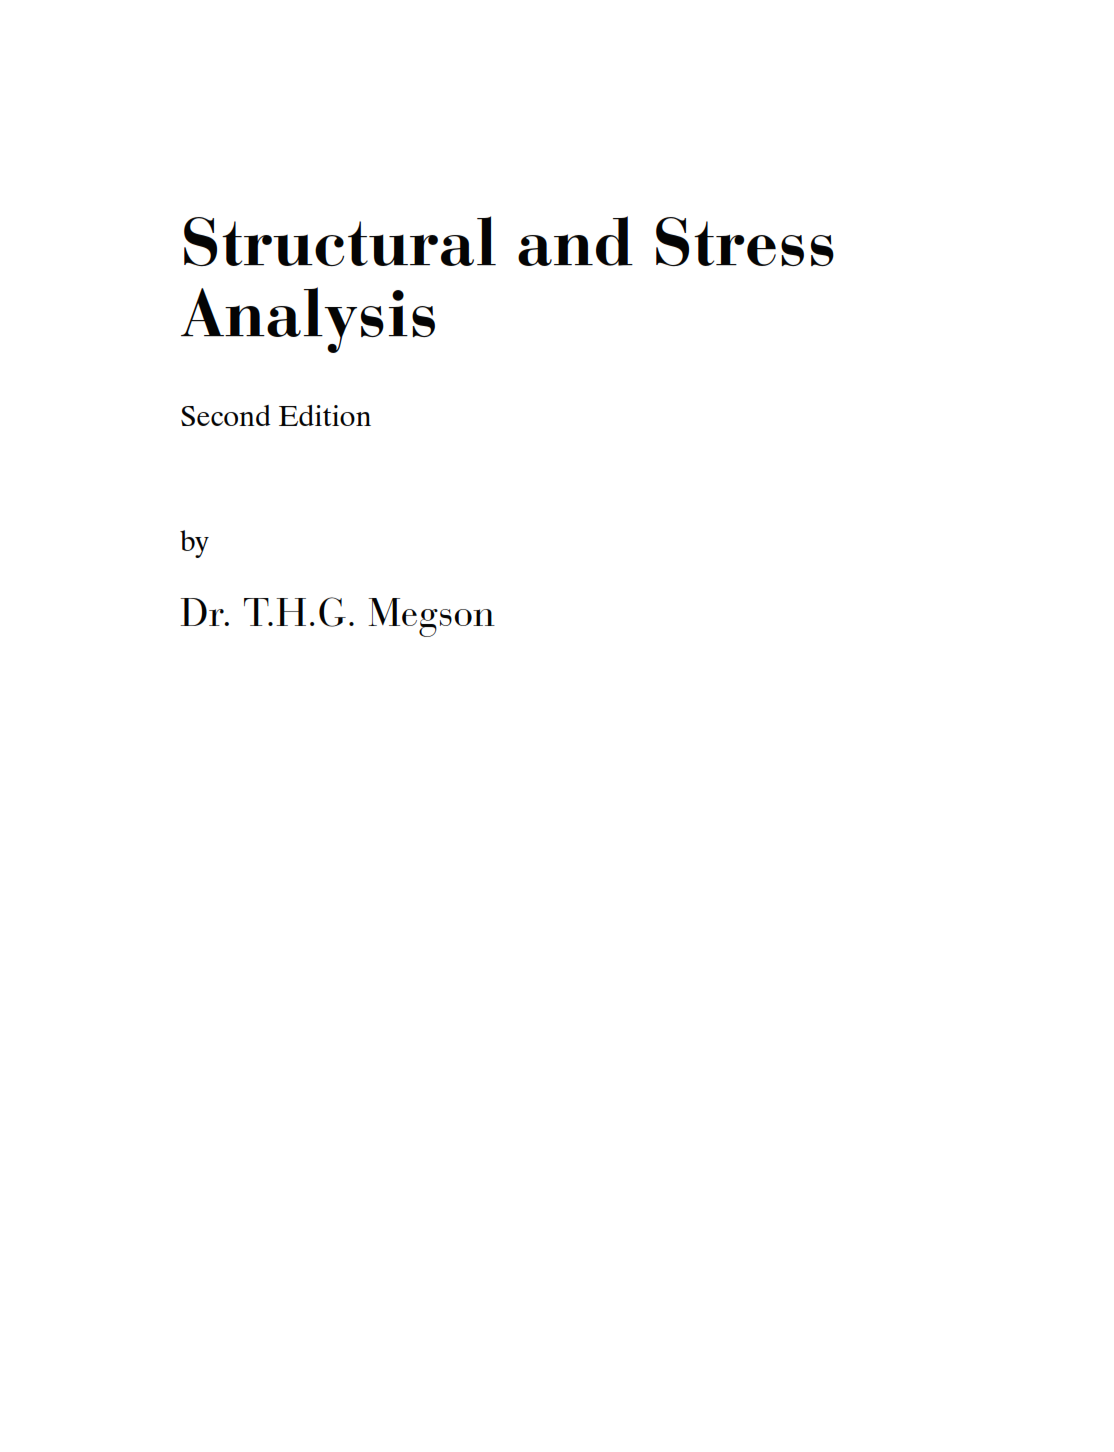 Download free structural and stress analysis solution manual T.H.G. Megson 2nd edition pdf | problems and solutions